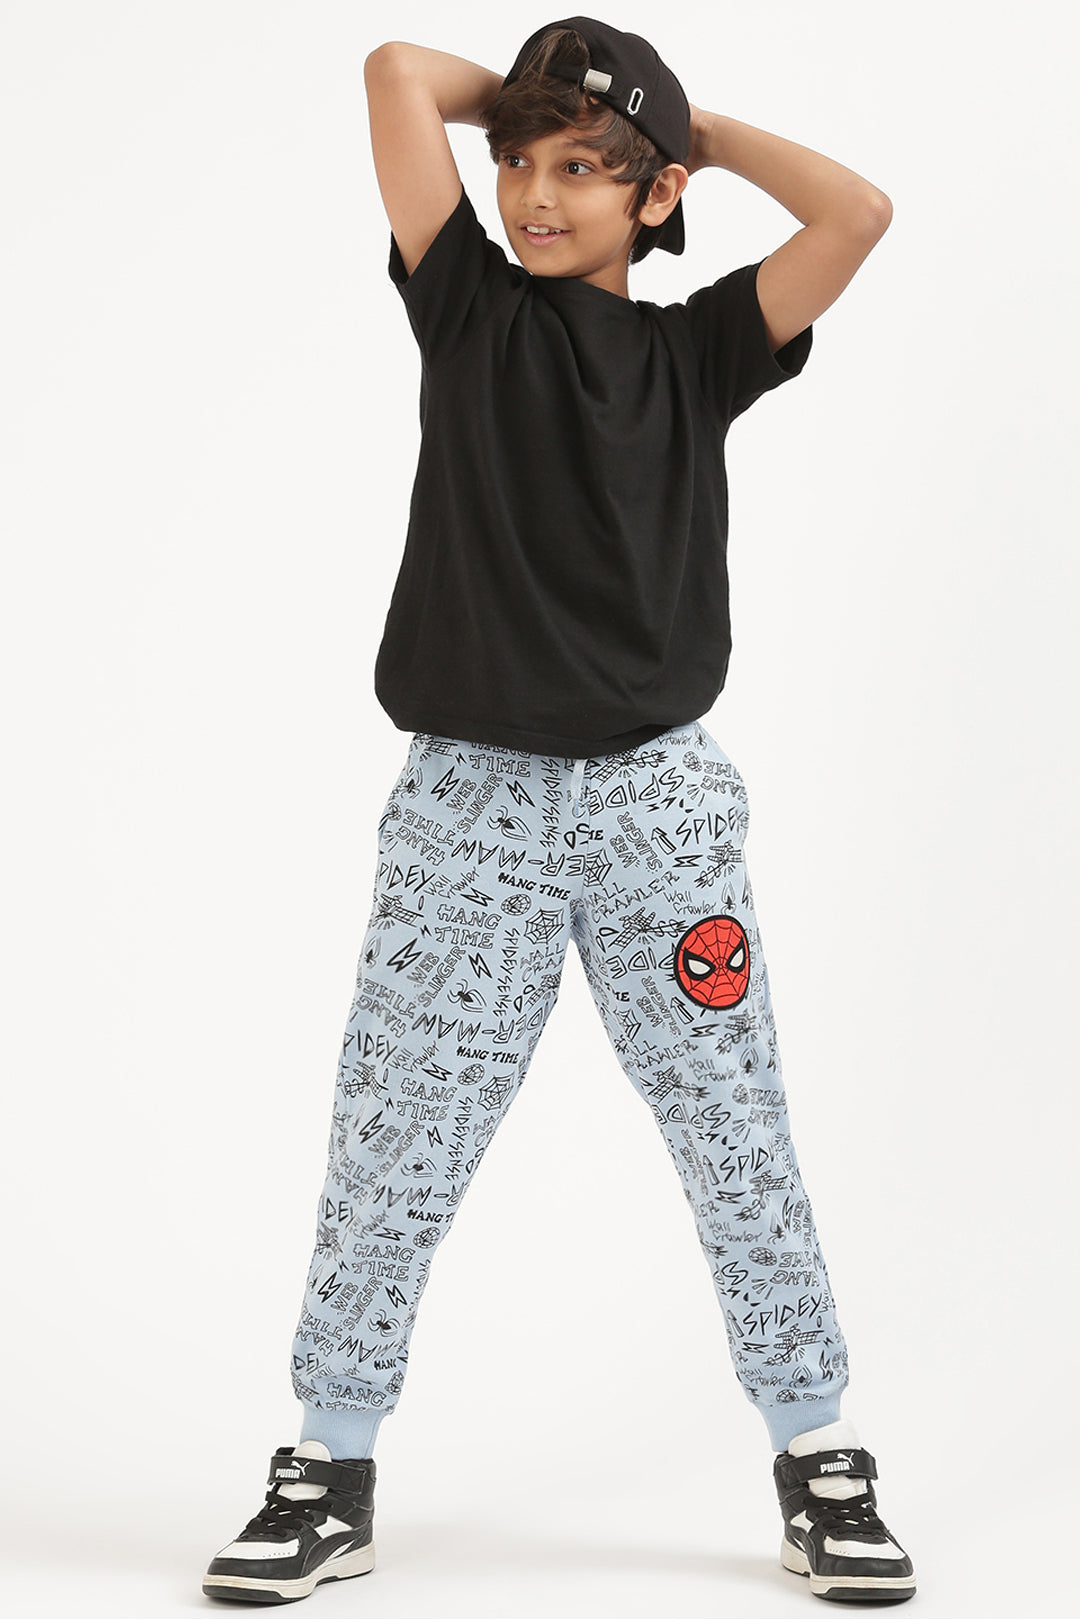 Spider-Man Printed Joggers